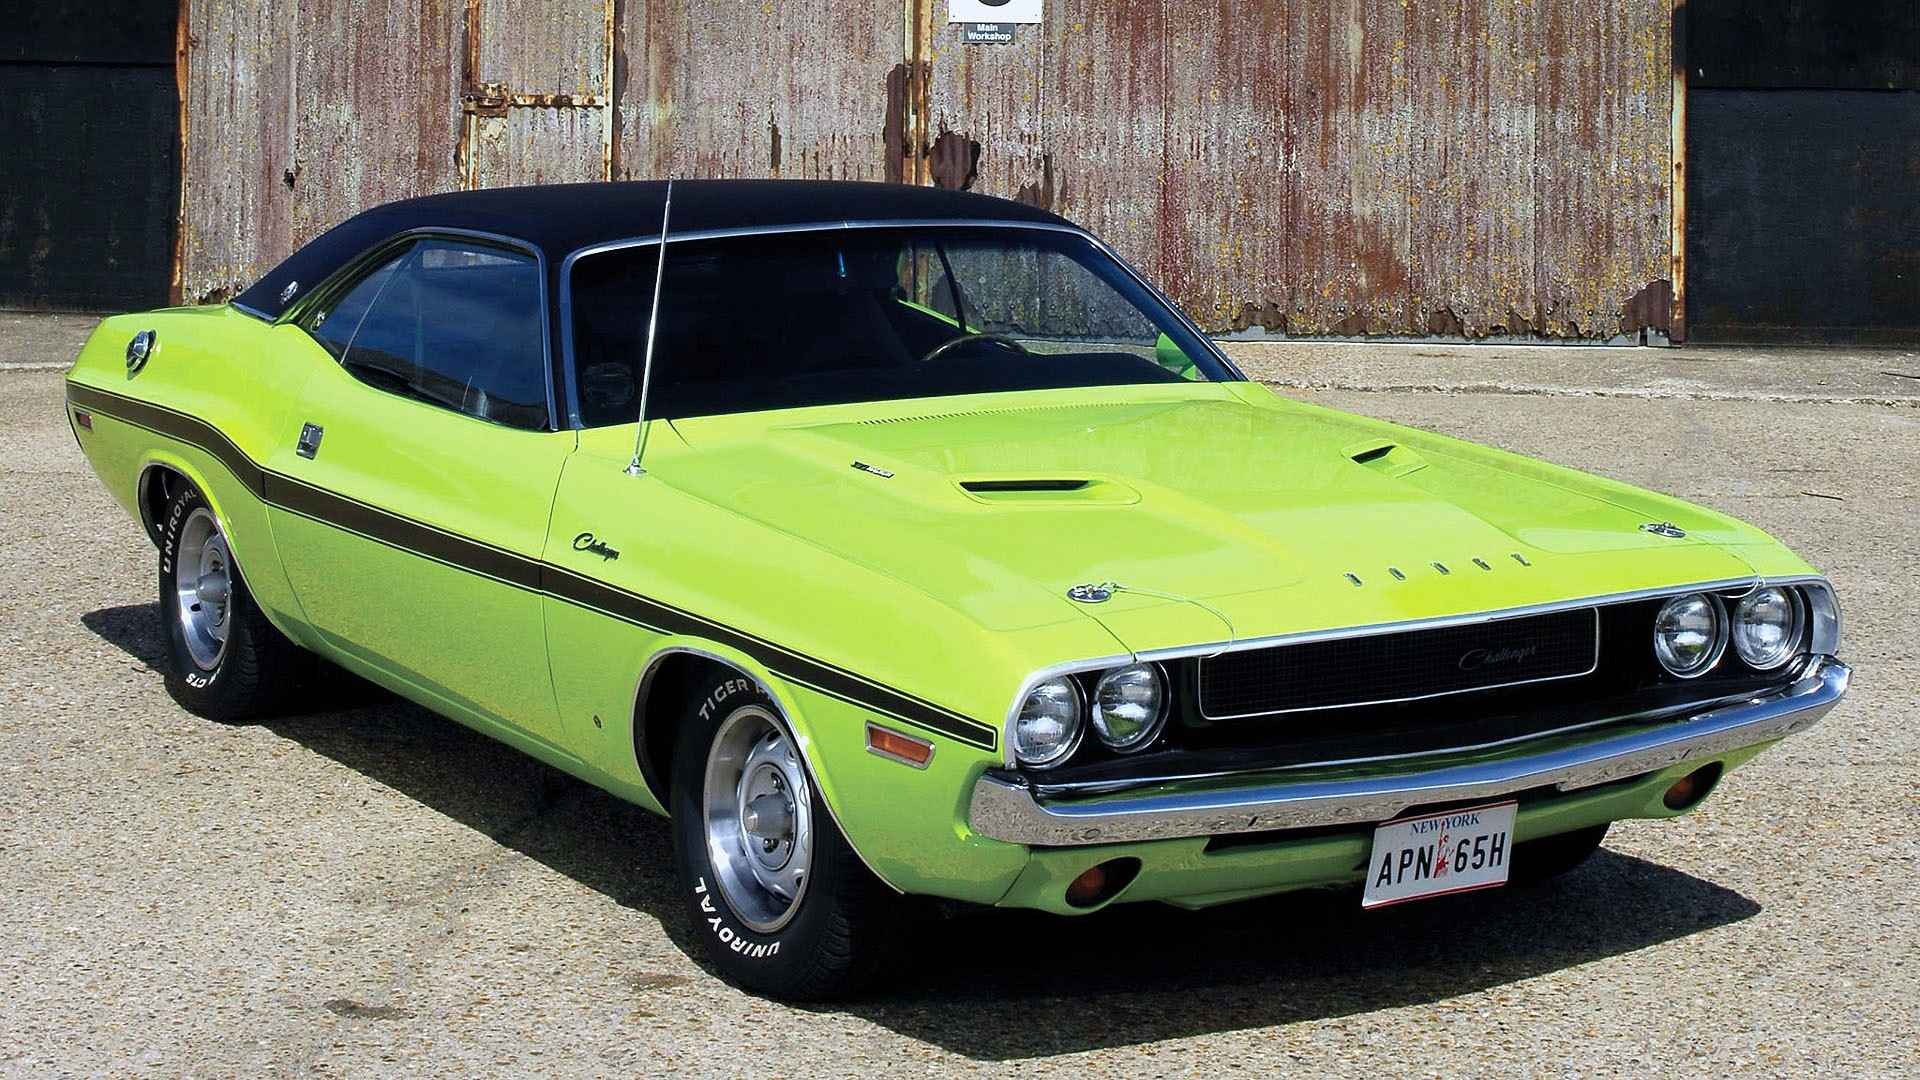 General 1920x1080 Dodge vehicle green cars car Dodge Challenger American cars muscle cars